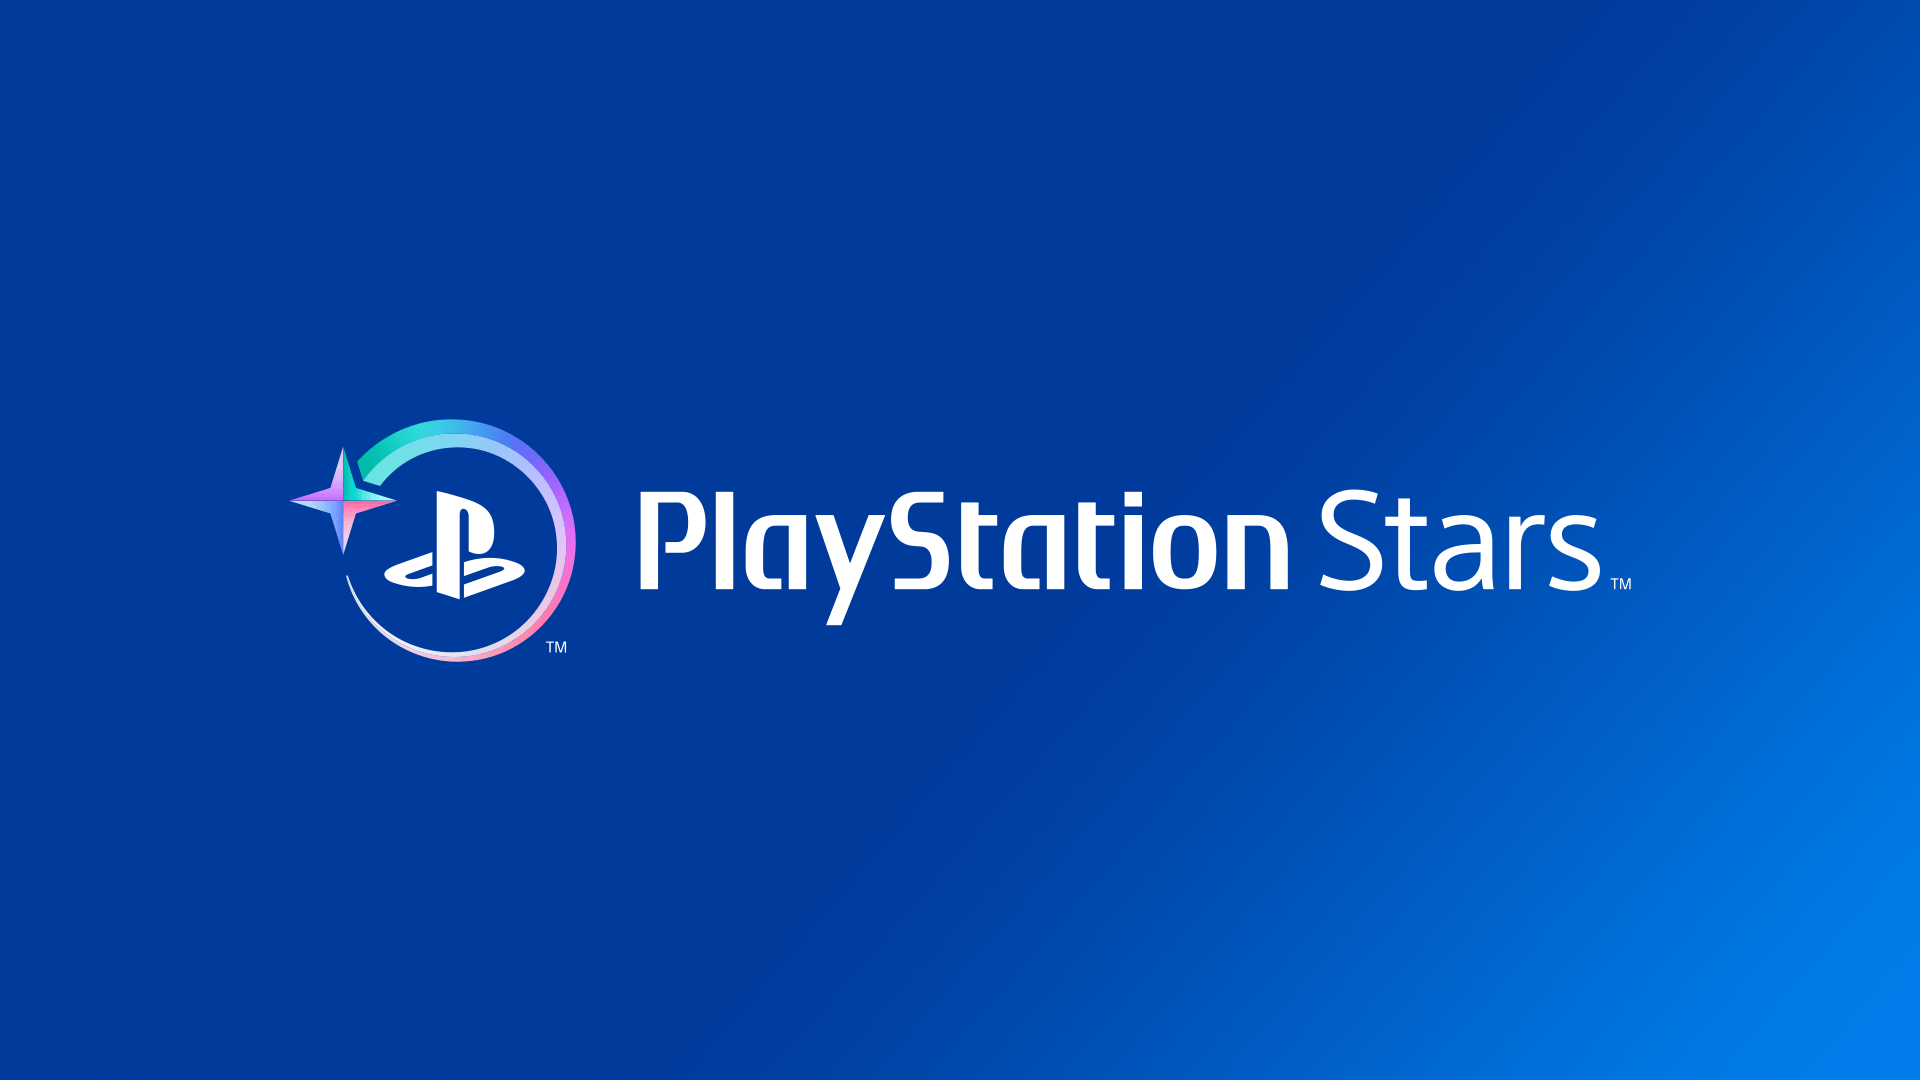 Sony's PlayStation Network is down (update) - Polygon